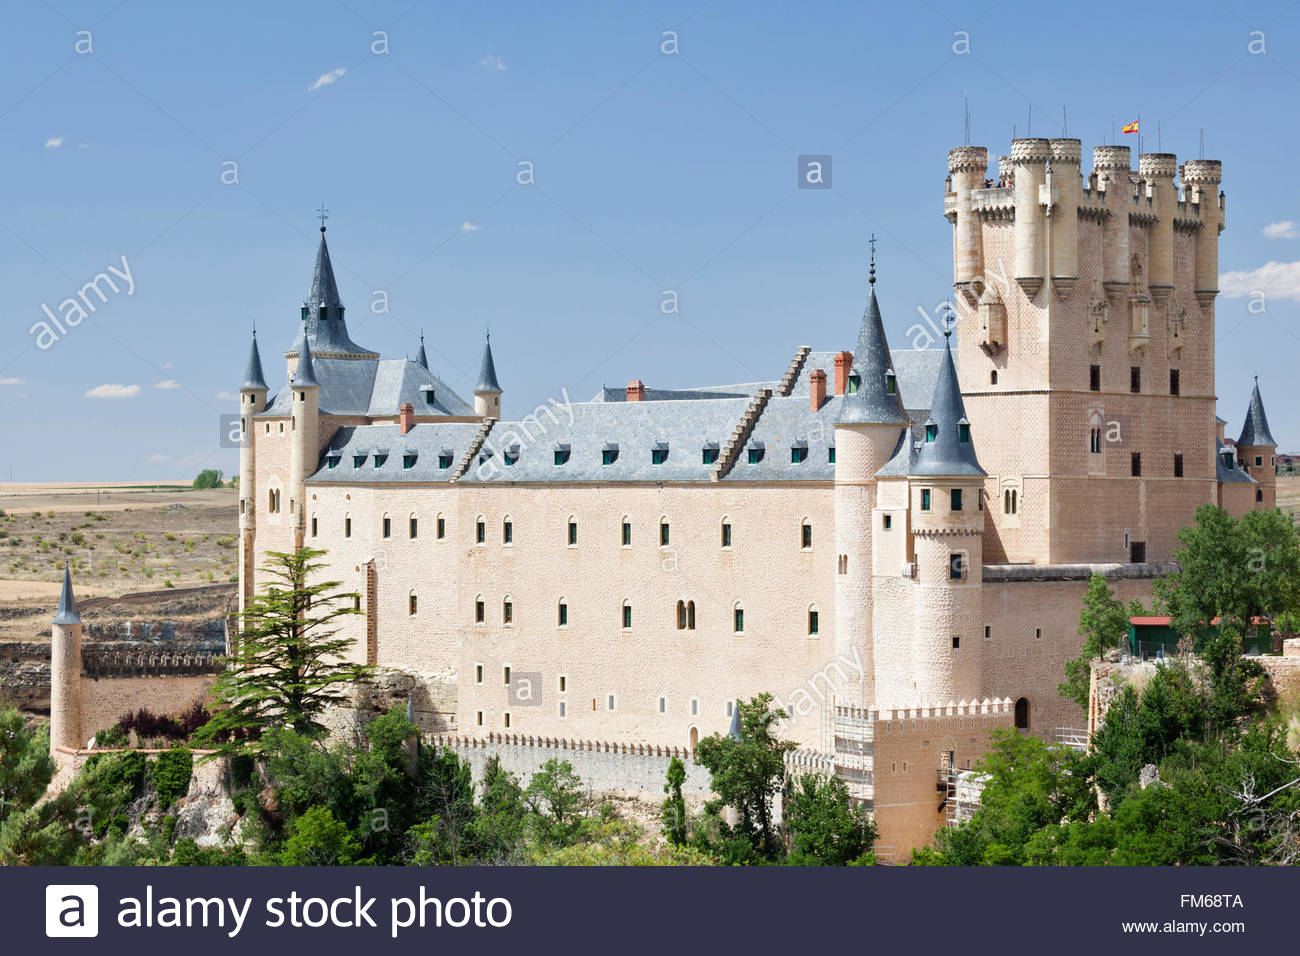 An exterior view of a large castle like building called Alcazar of Segovia,  seen from